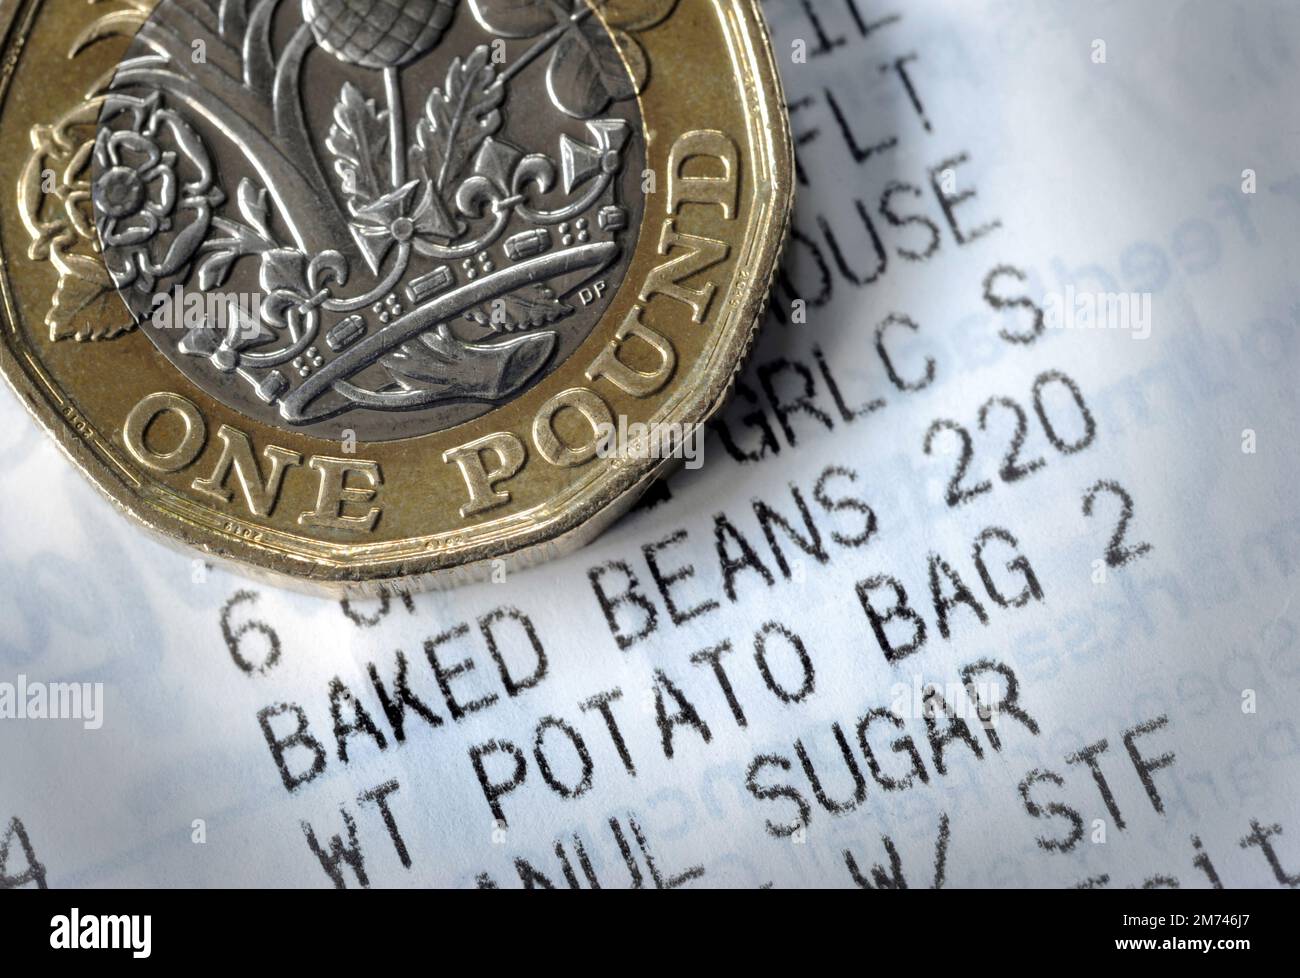 FOOD SHOPPING RECEIPT WITH ONE POUND COIN RE COST OF LIVING CRISIS BASIC SHOP PRICES RISING COSTS HOUSEHOLD BUDGETS ETC UK Stock Photo